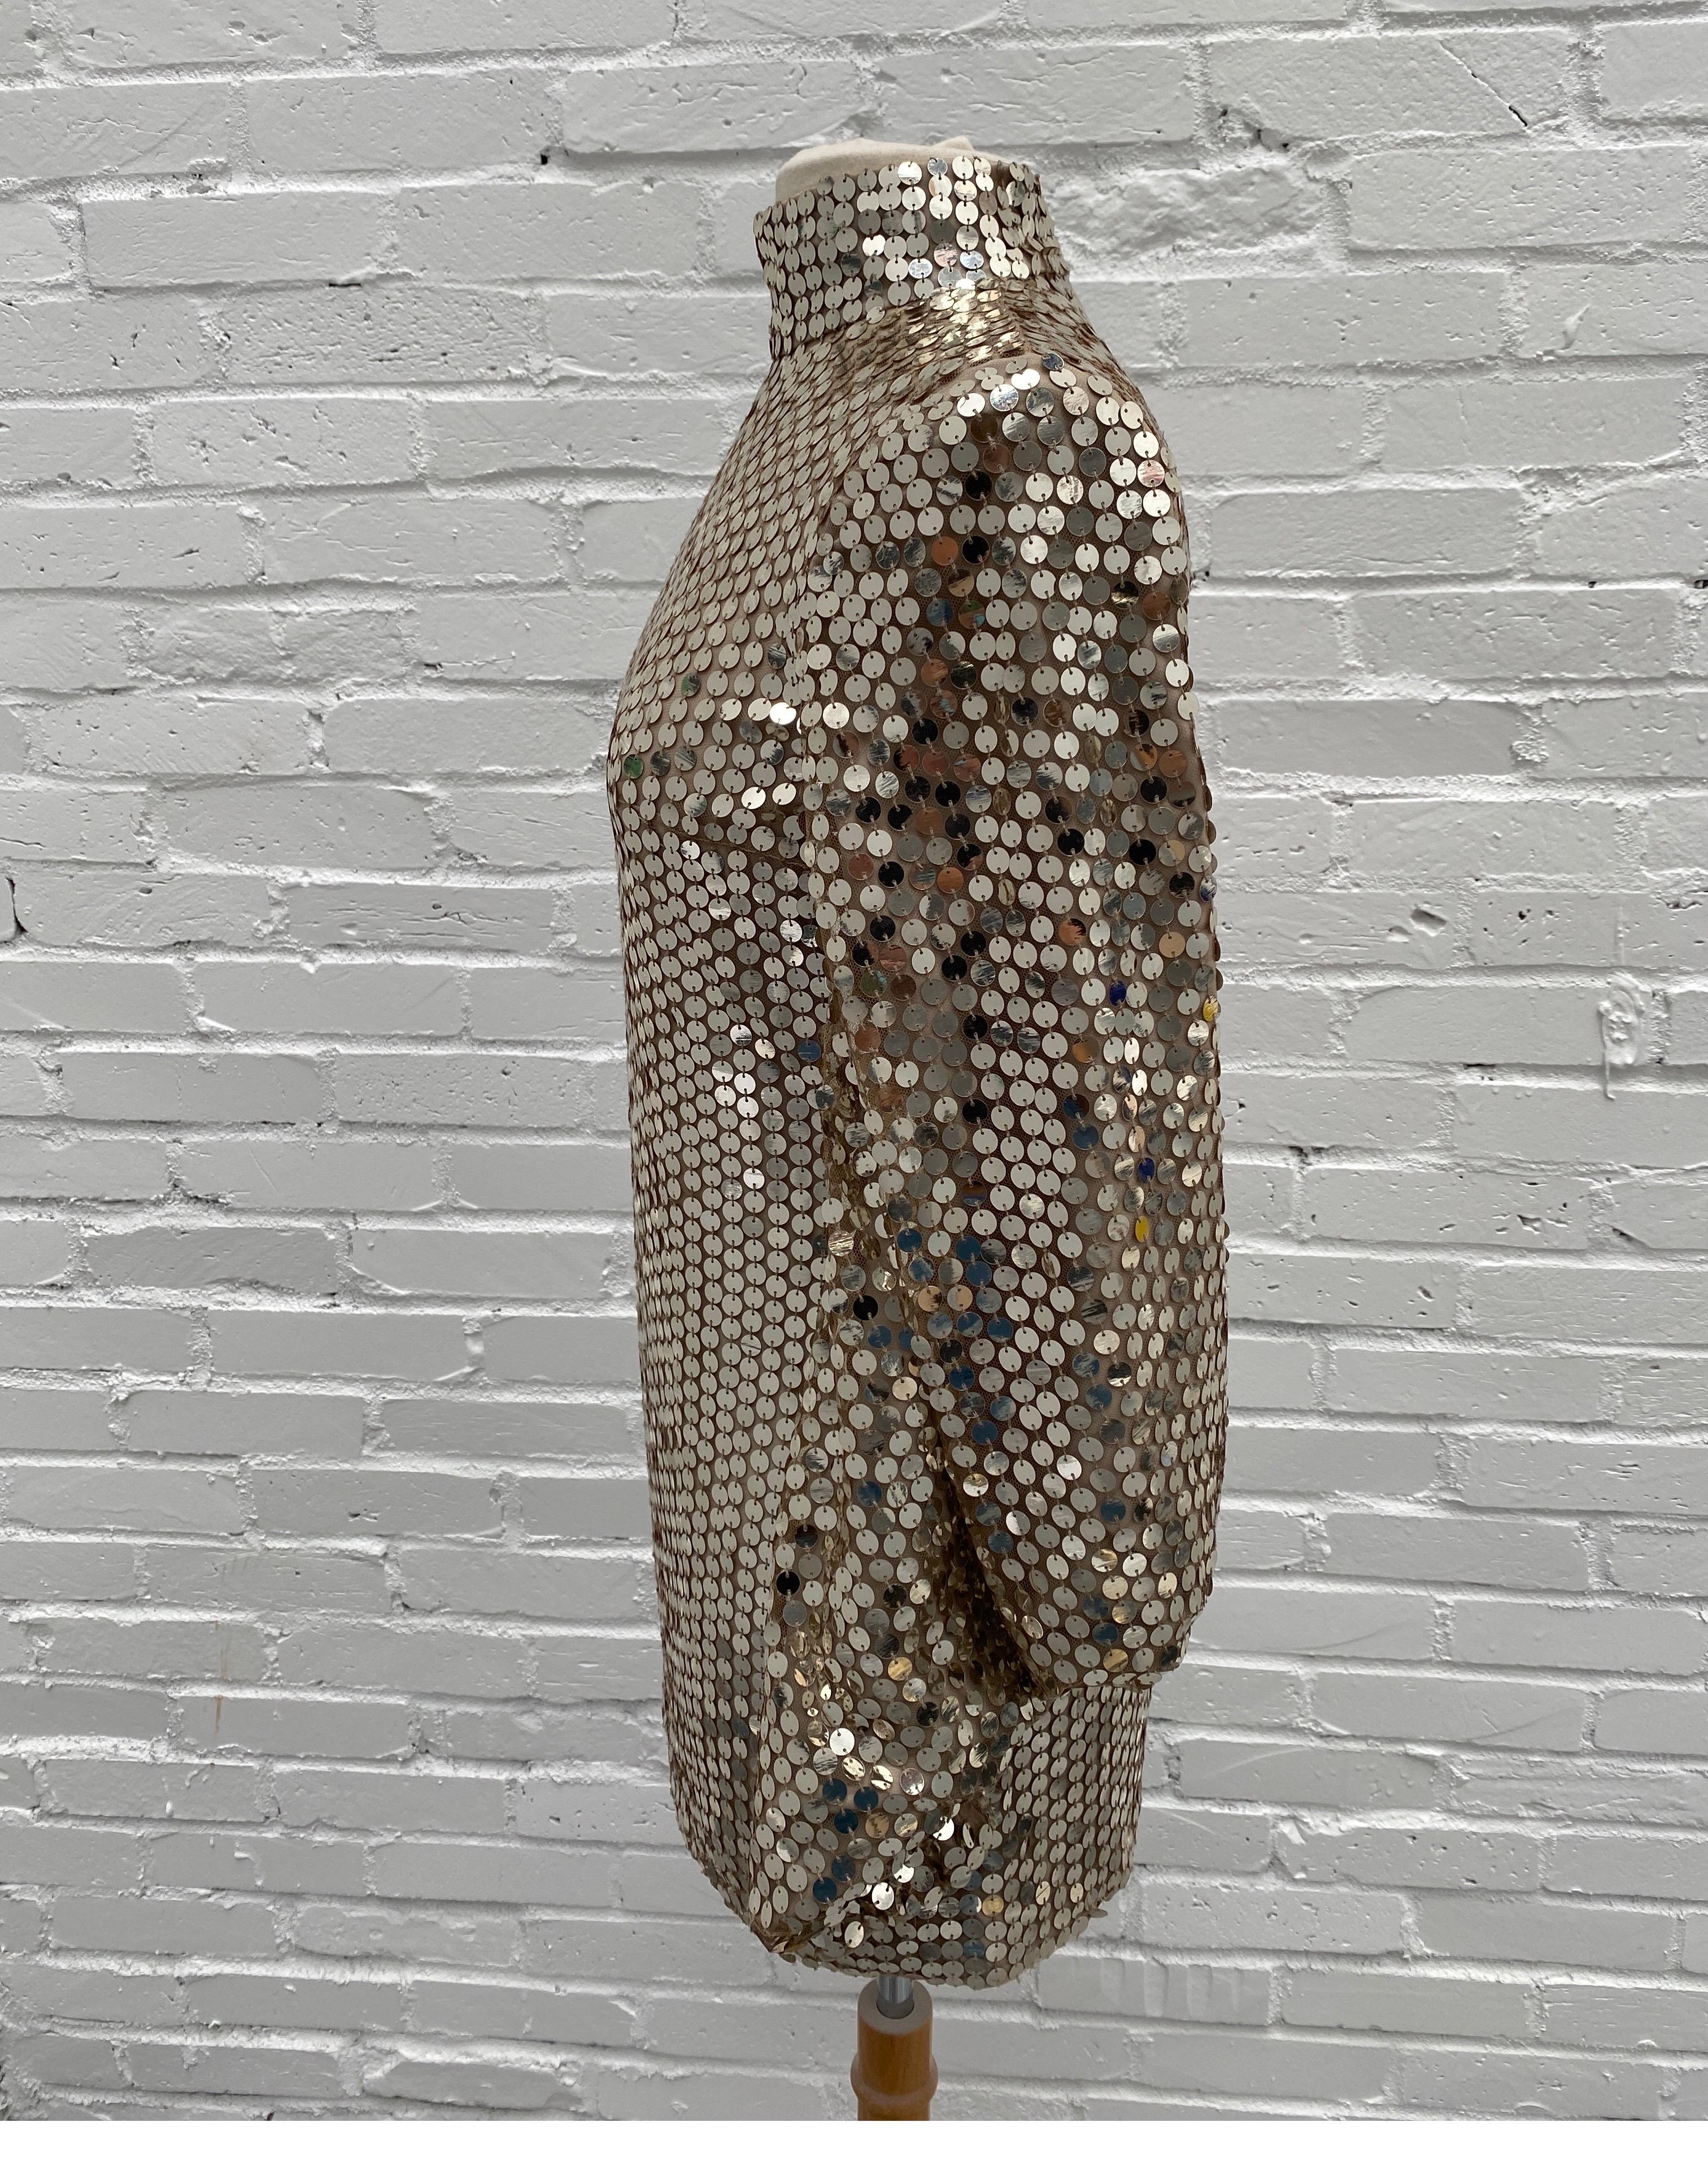 Tom Ford Couture Sequin Dress. Gorgeous sequins. Champagne gold color. Size XS. Size 0-2. Brand new condition. Mini dress. Retail $9500. Guaranteed authentic. 